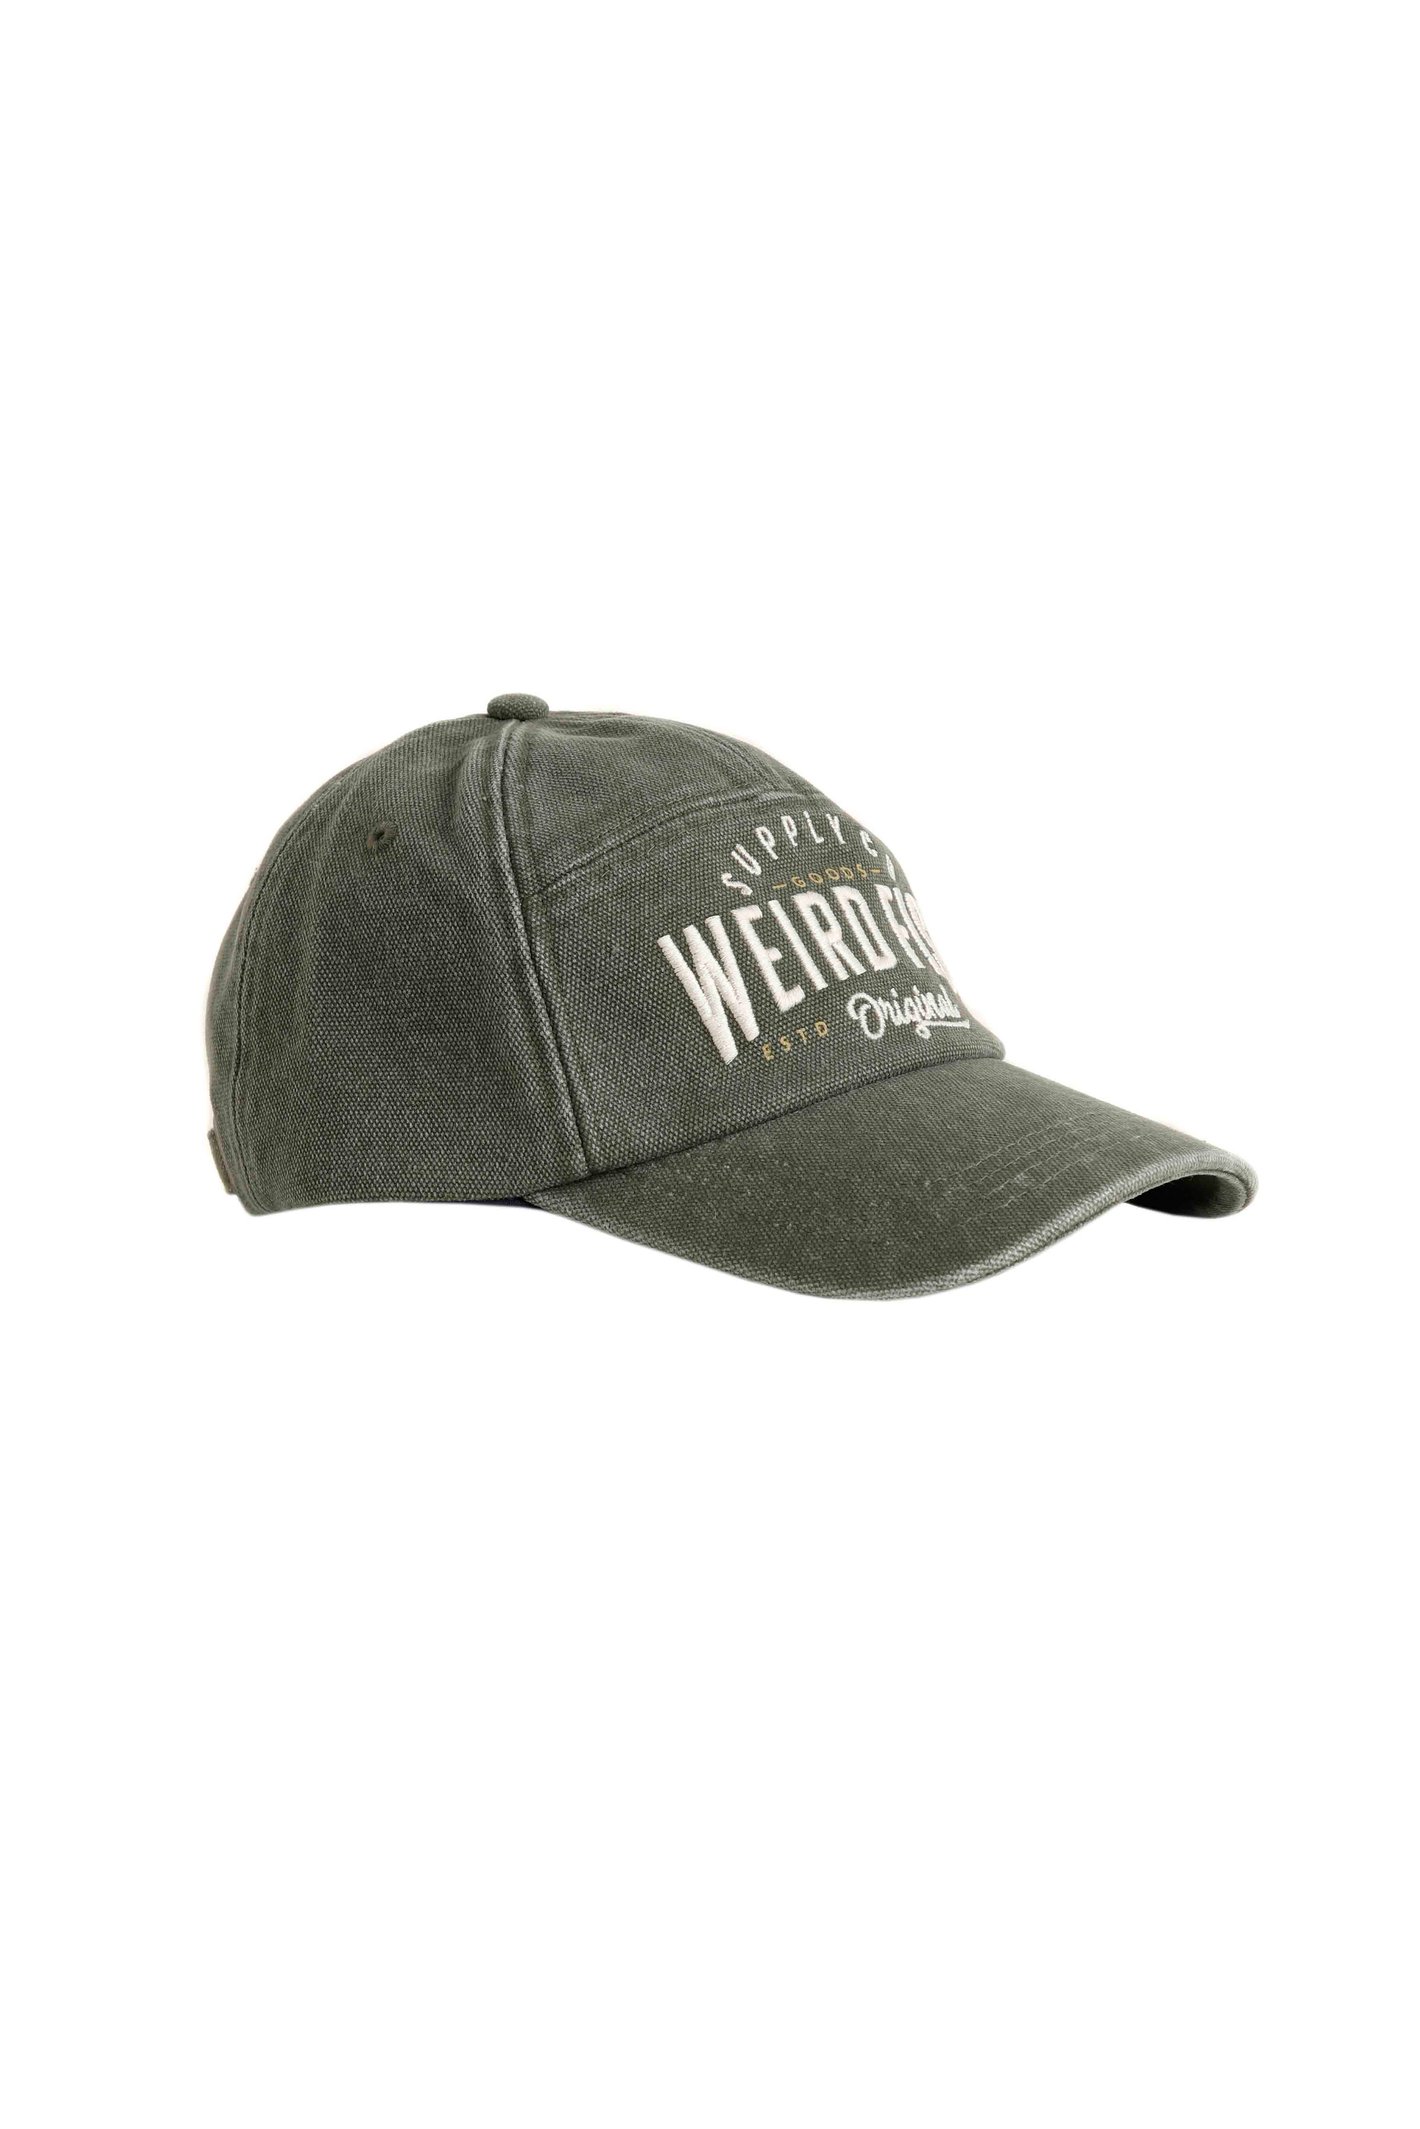 weird fish vincent graphic cap thyme size one